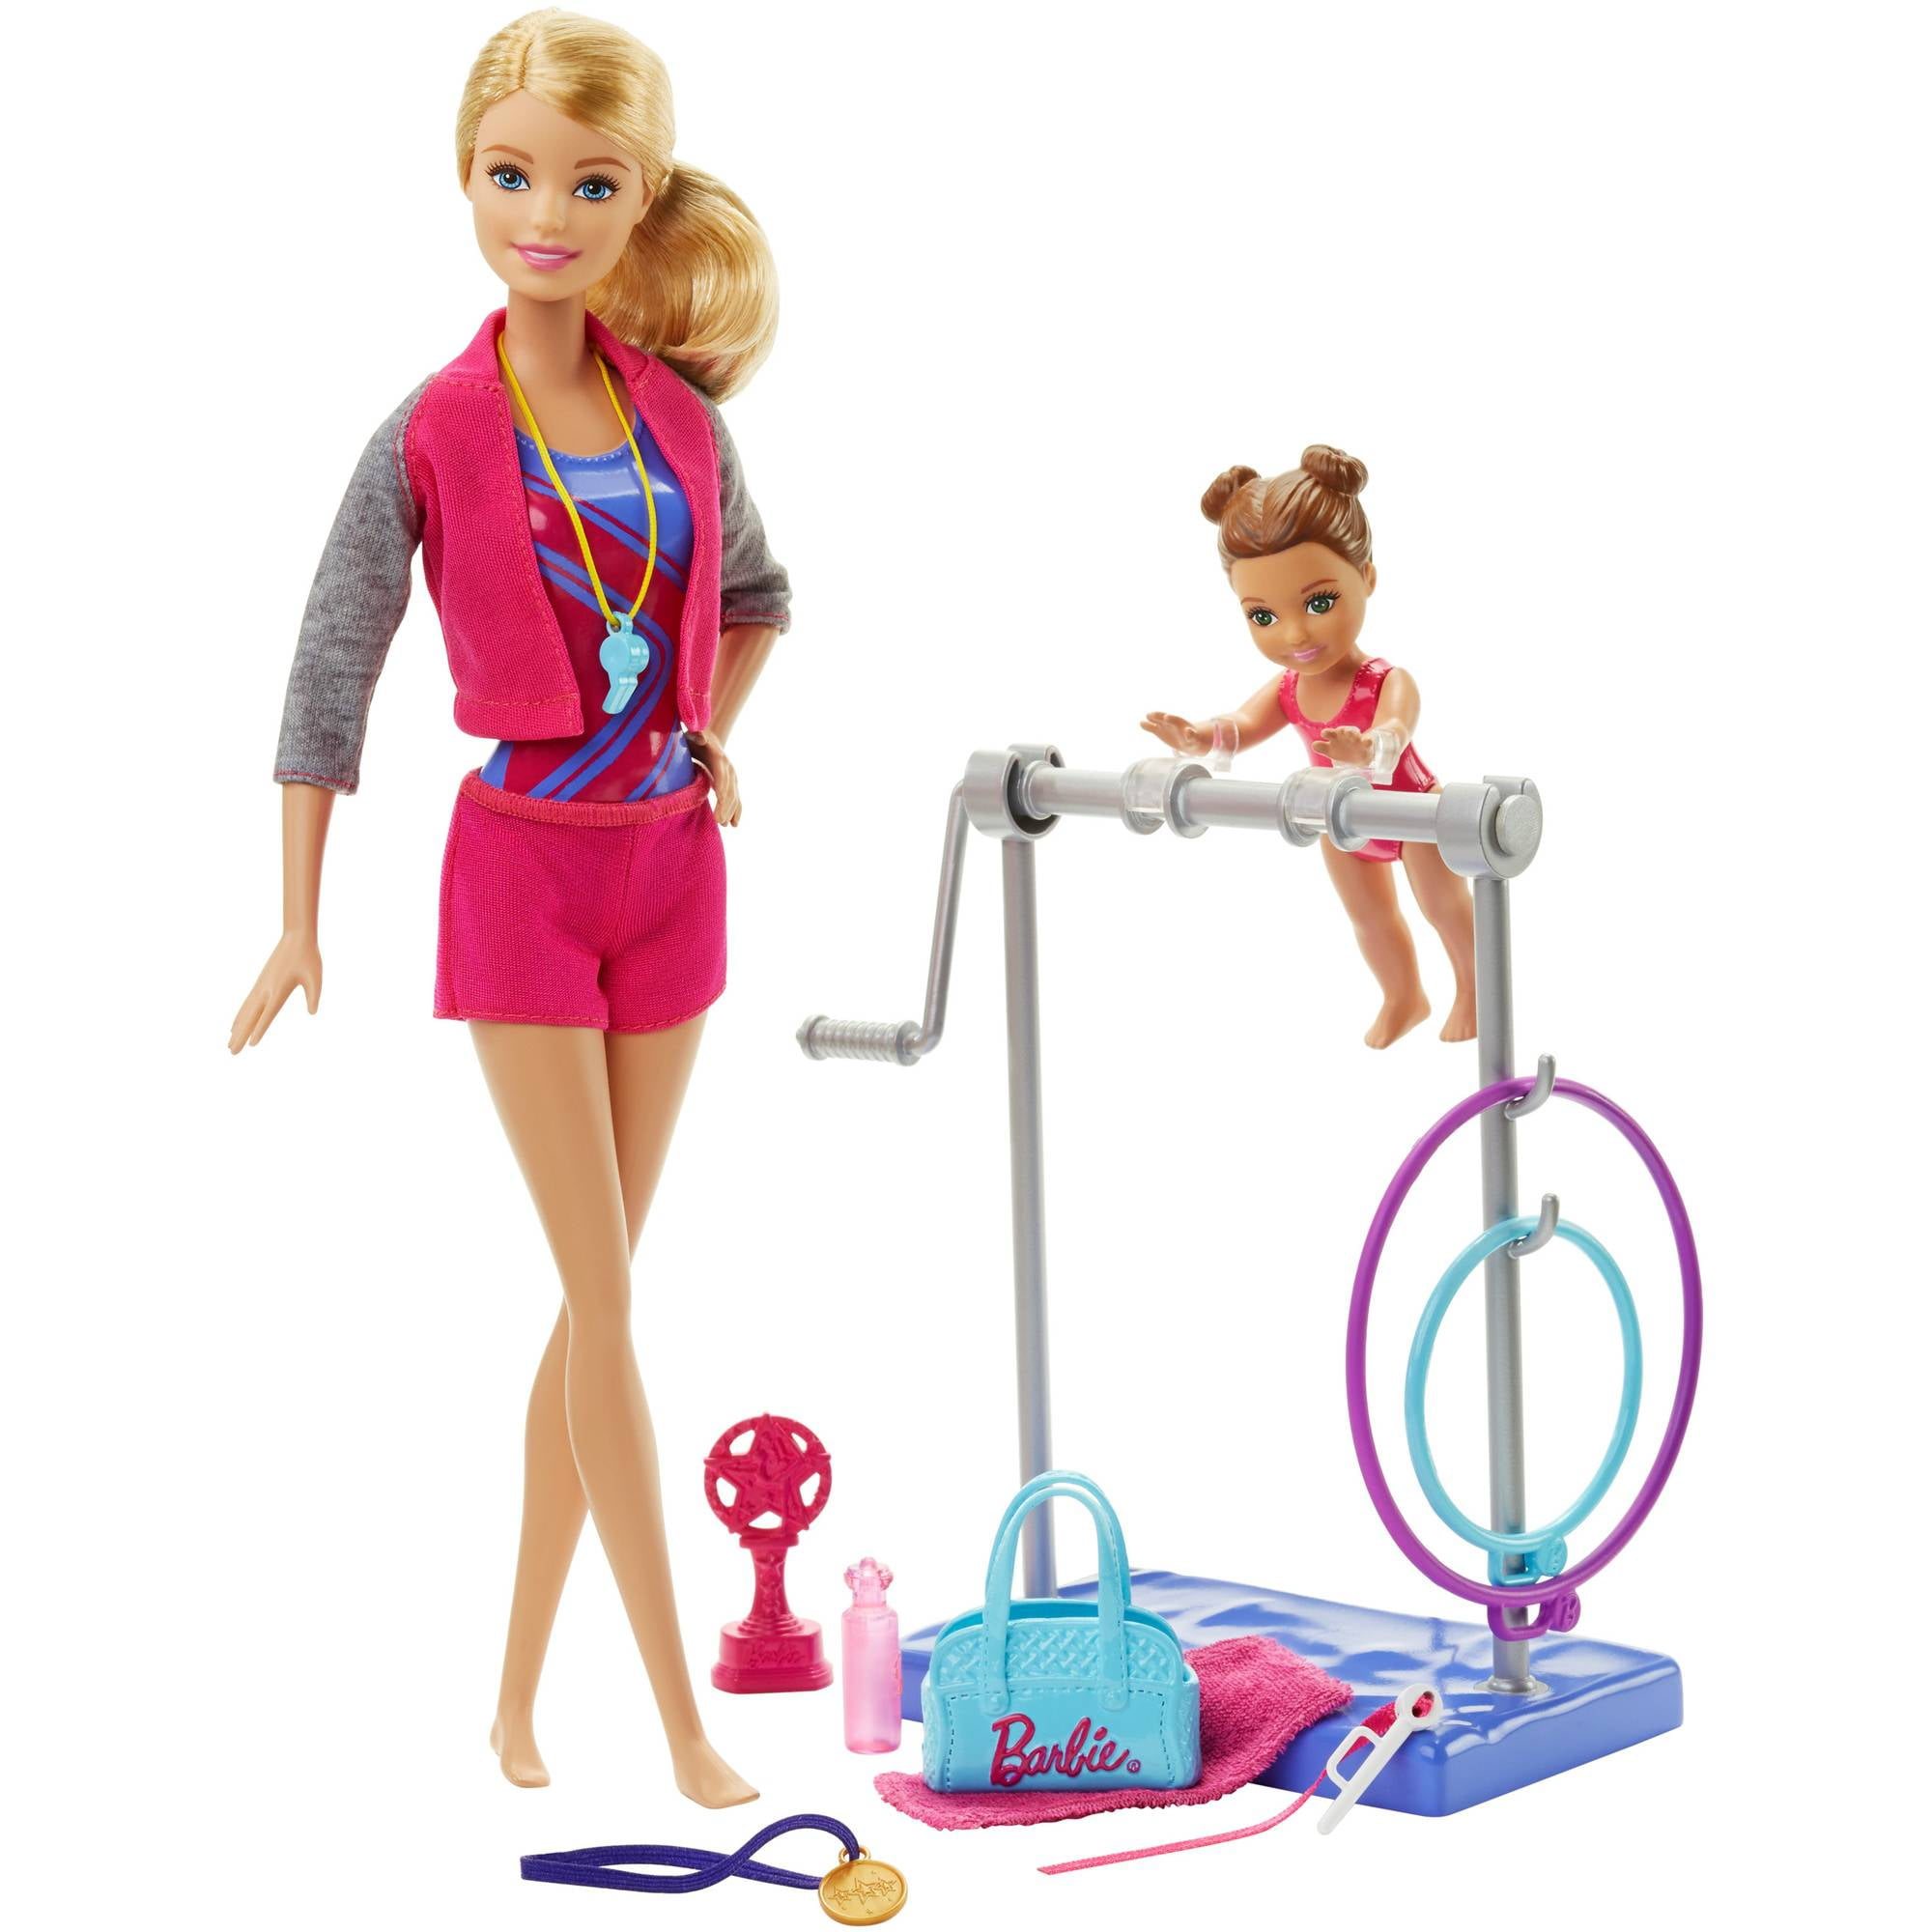 NEW OFFICIAL BARBIE GYMNAST DOLL AND ACCESSORIES 